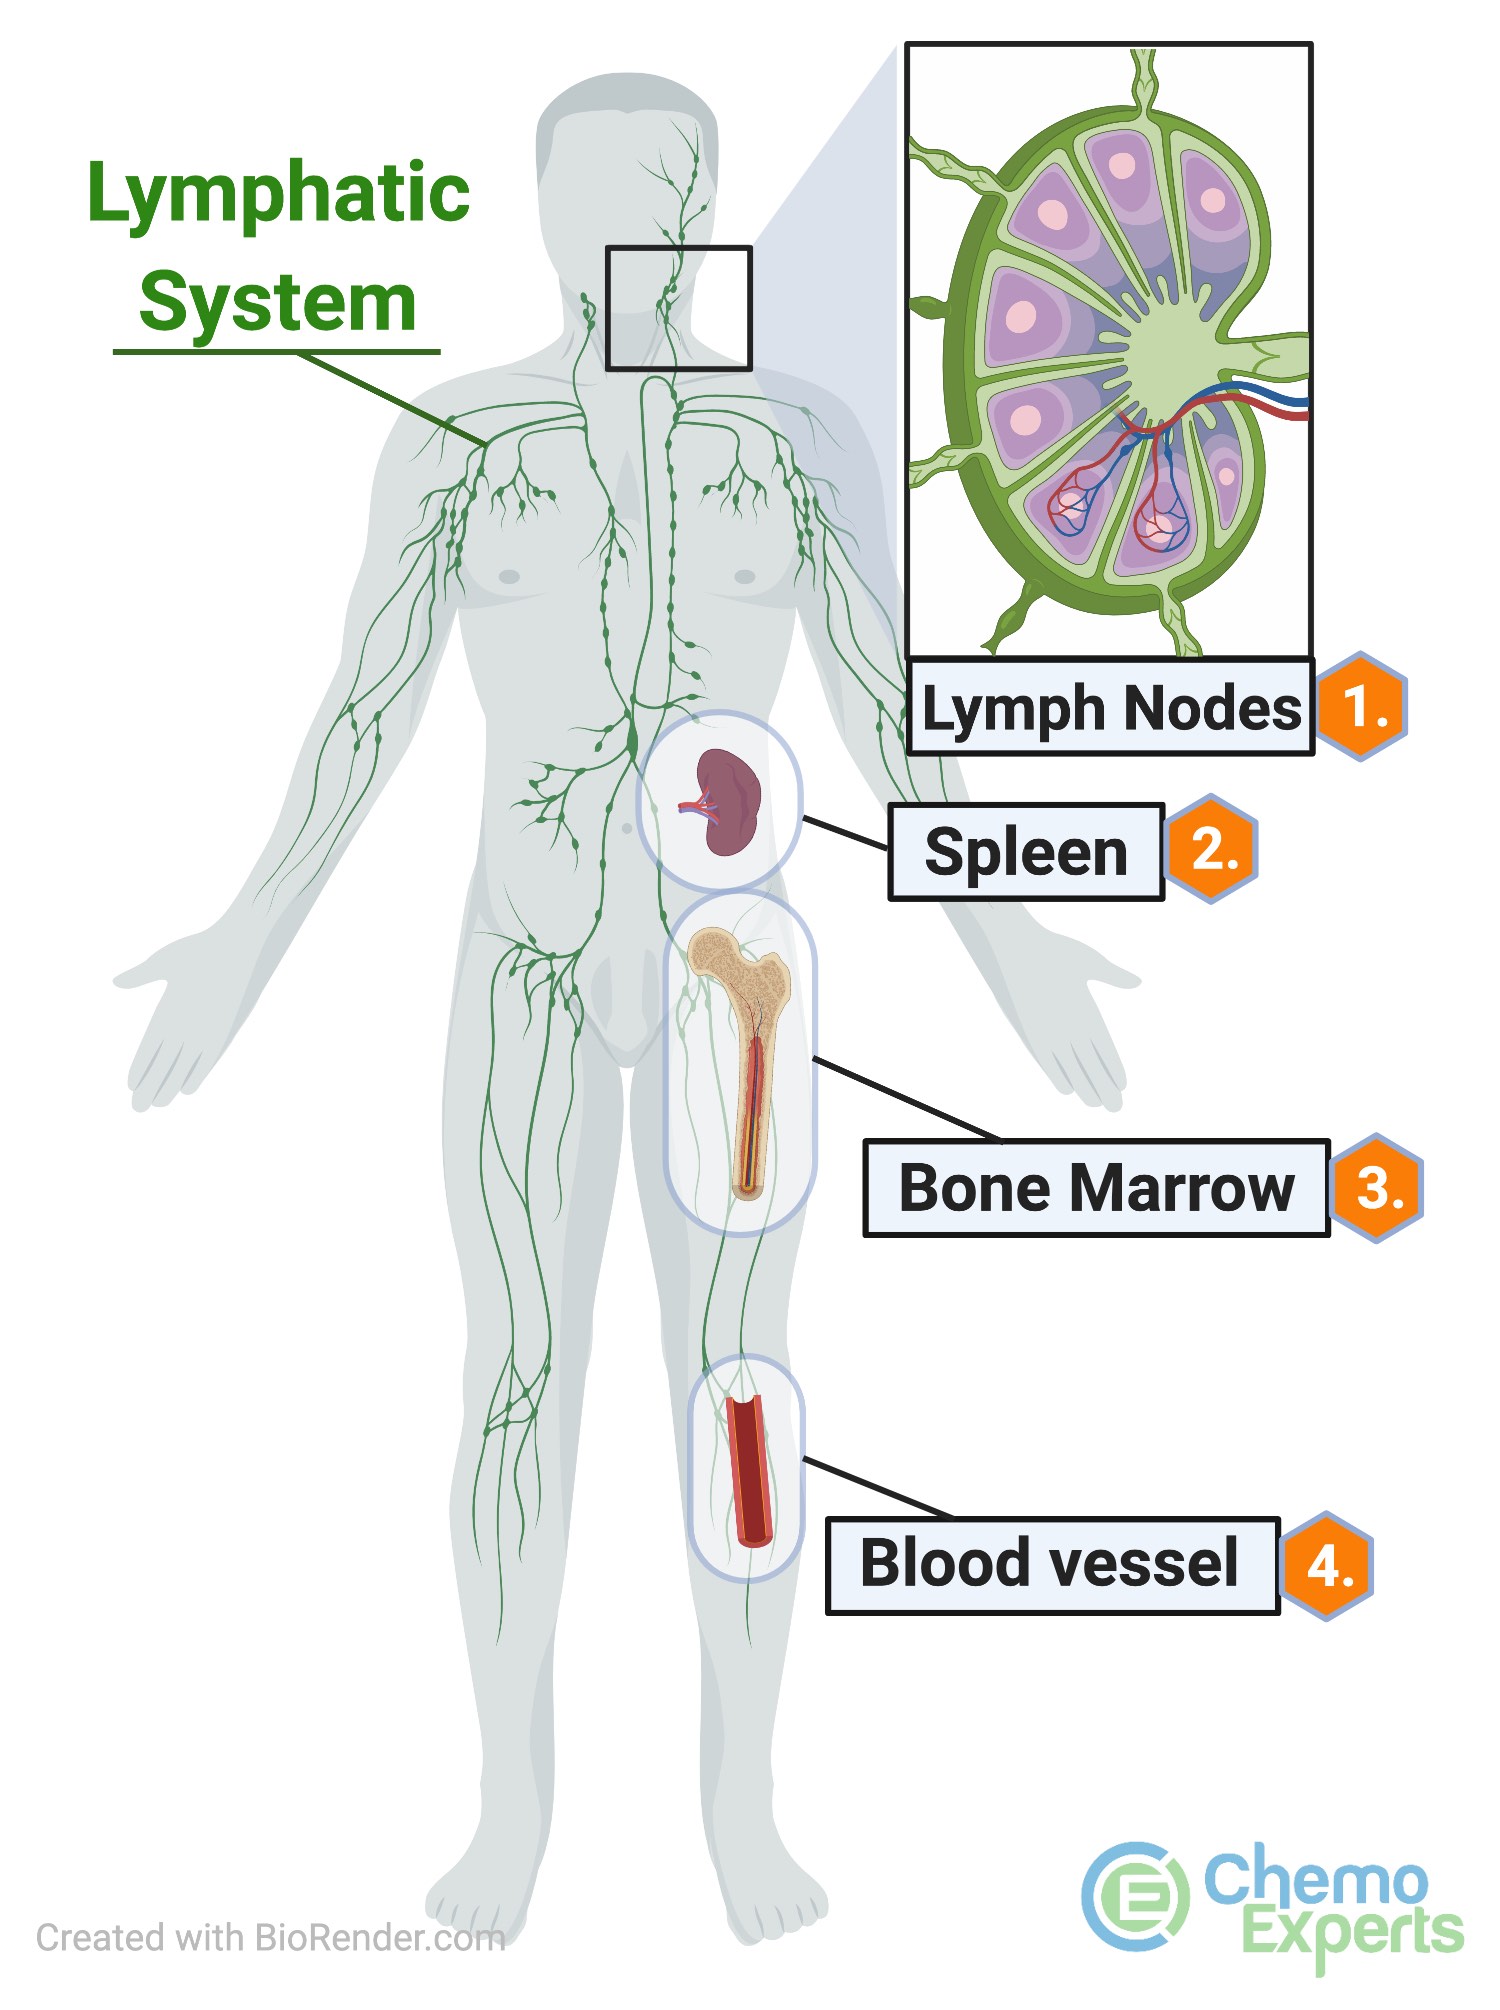 CLL may affect lymph nodes, the spleen, bone marrow, and the blood